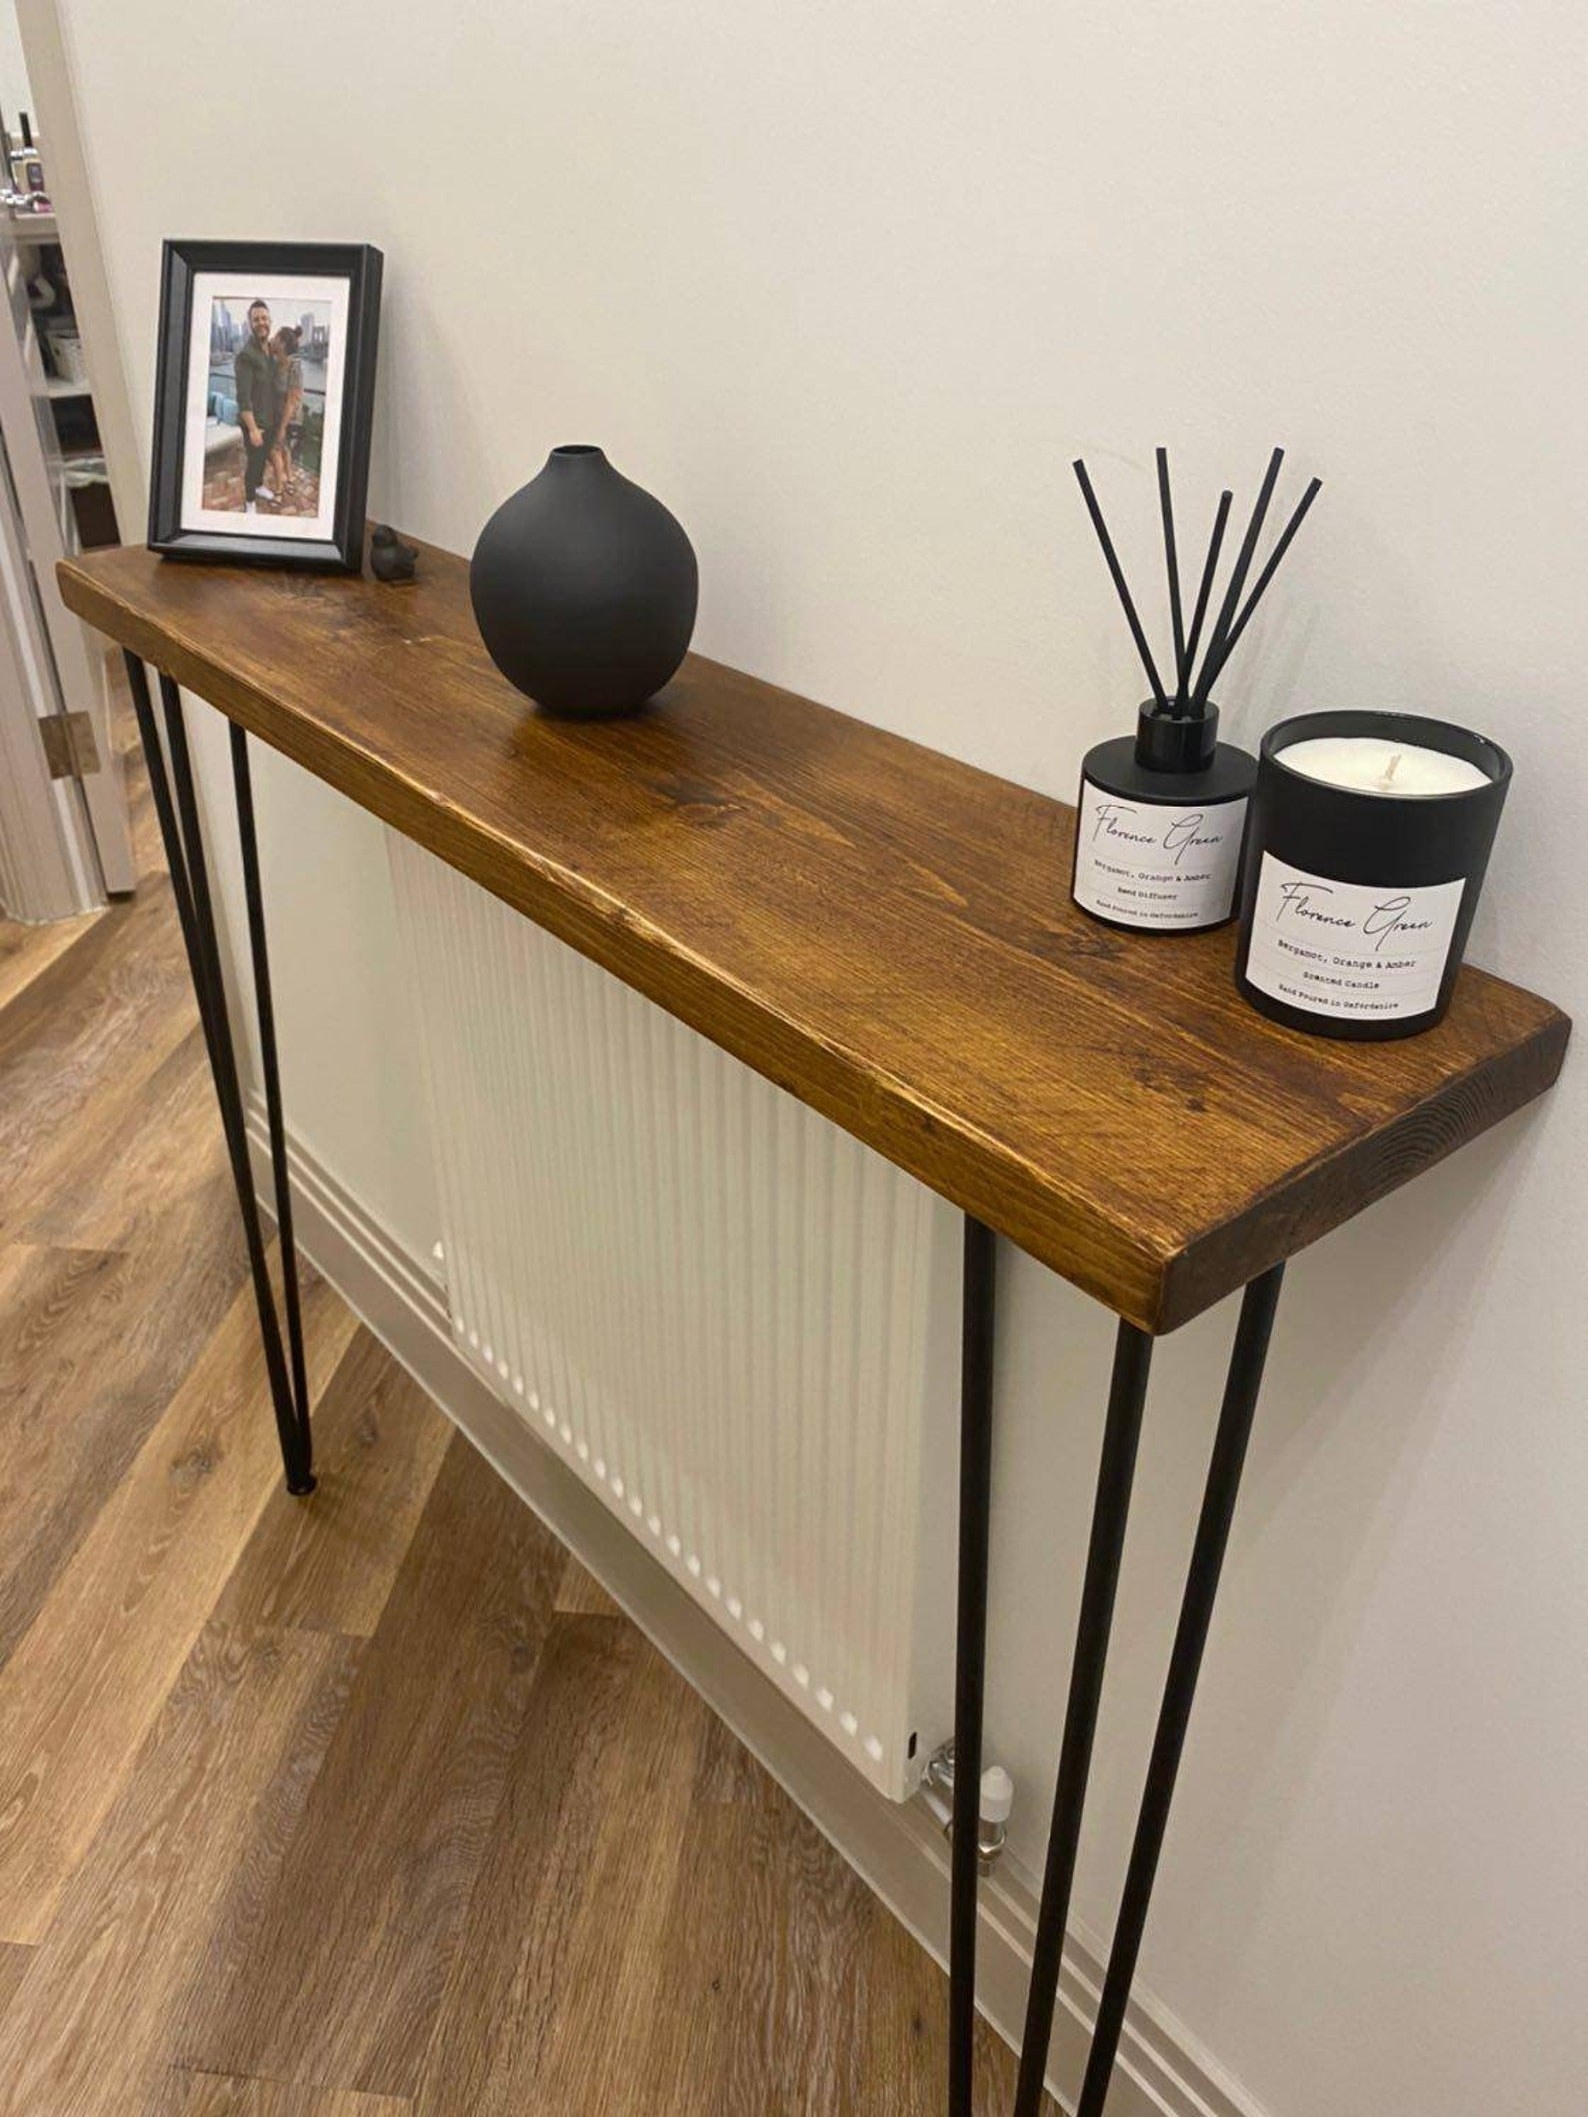 the wooden console table